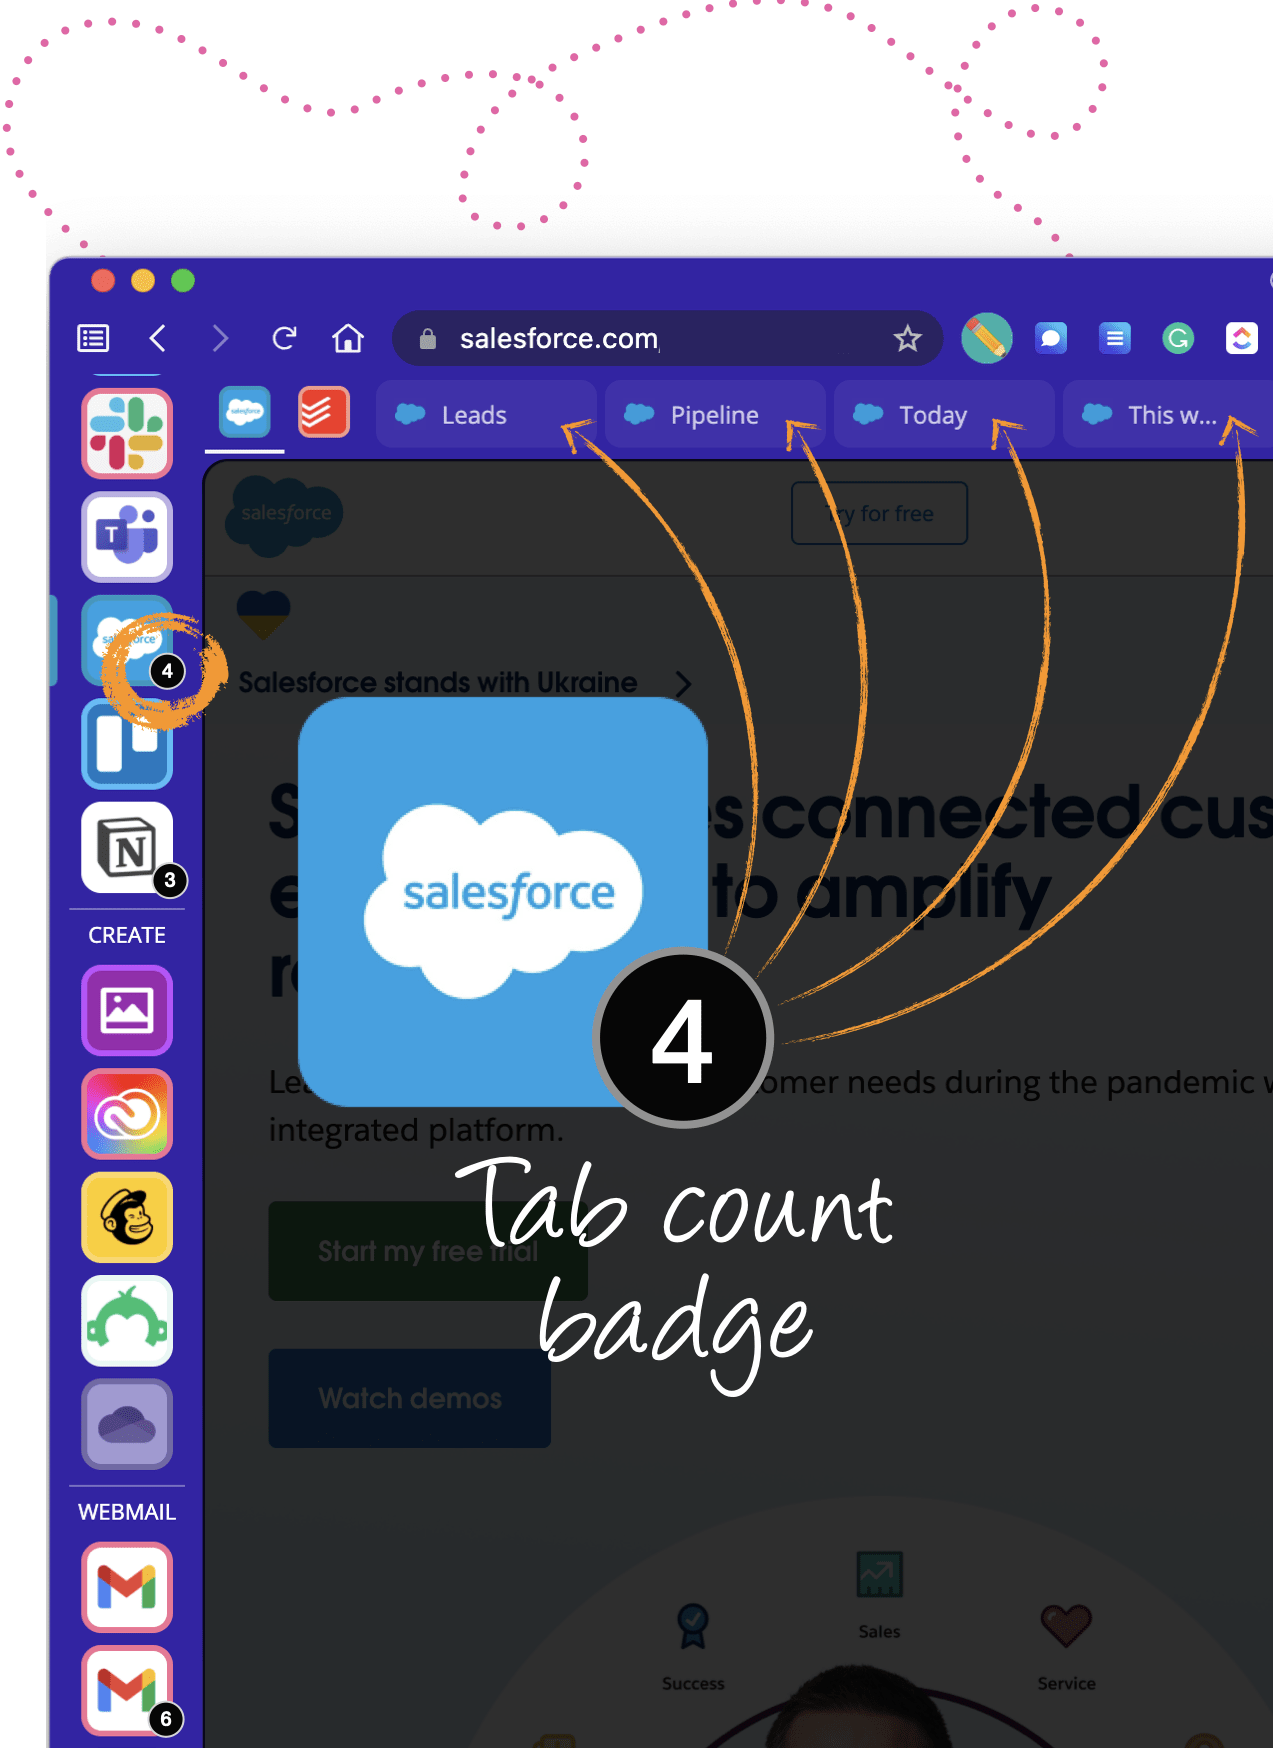 Use tabs within a group and/or app to stay focused.